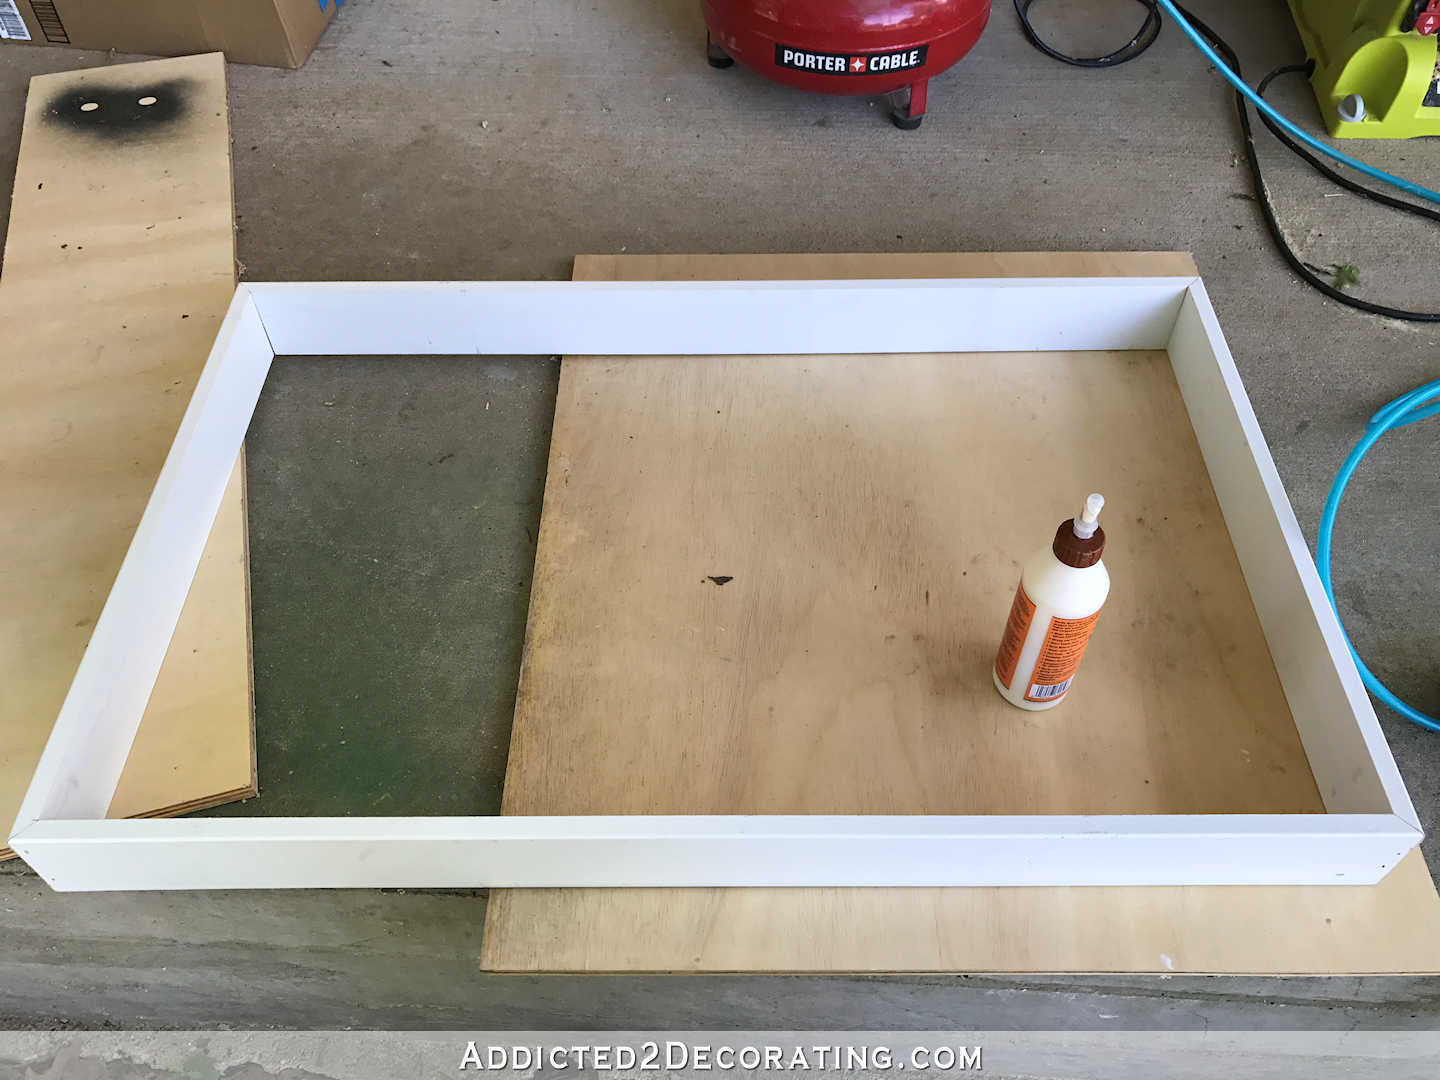 how to build an easy DIY frame for a wall mounted flat screen tv - 1 - build a simple box out of 1 x 4s